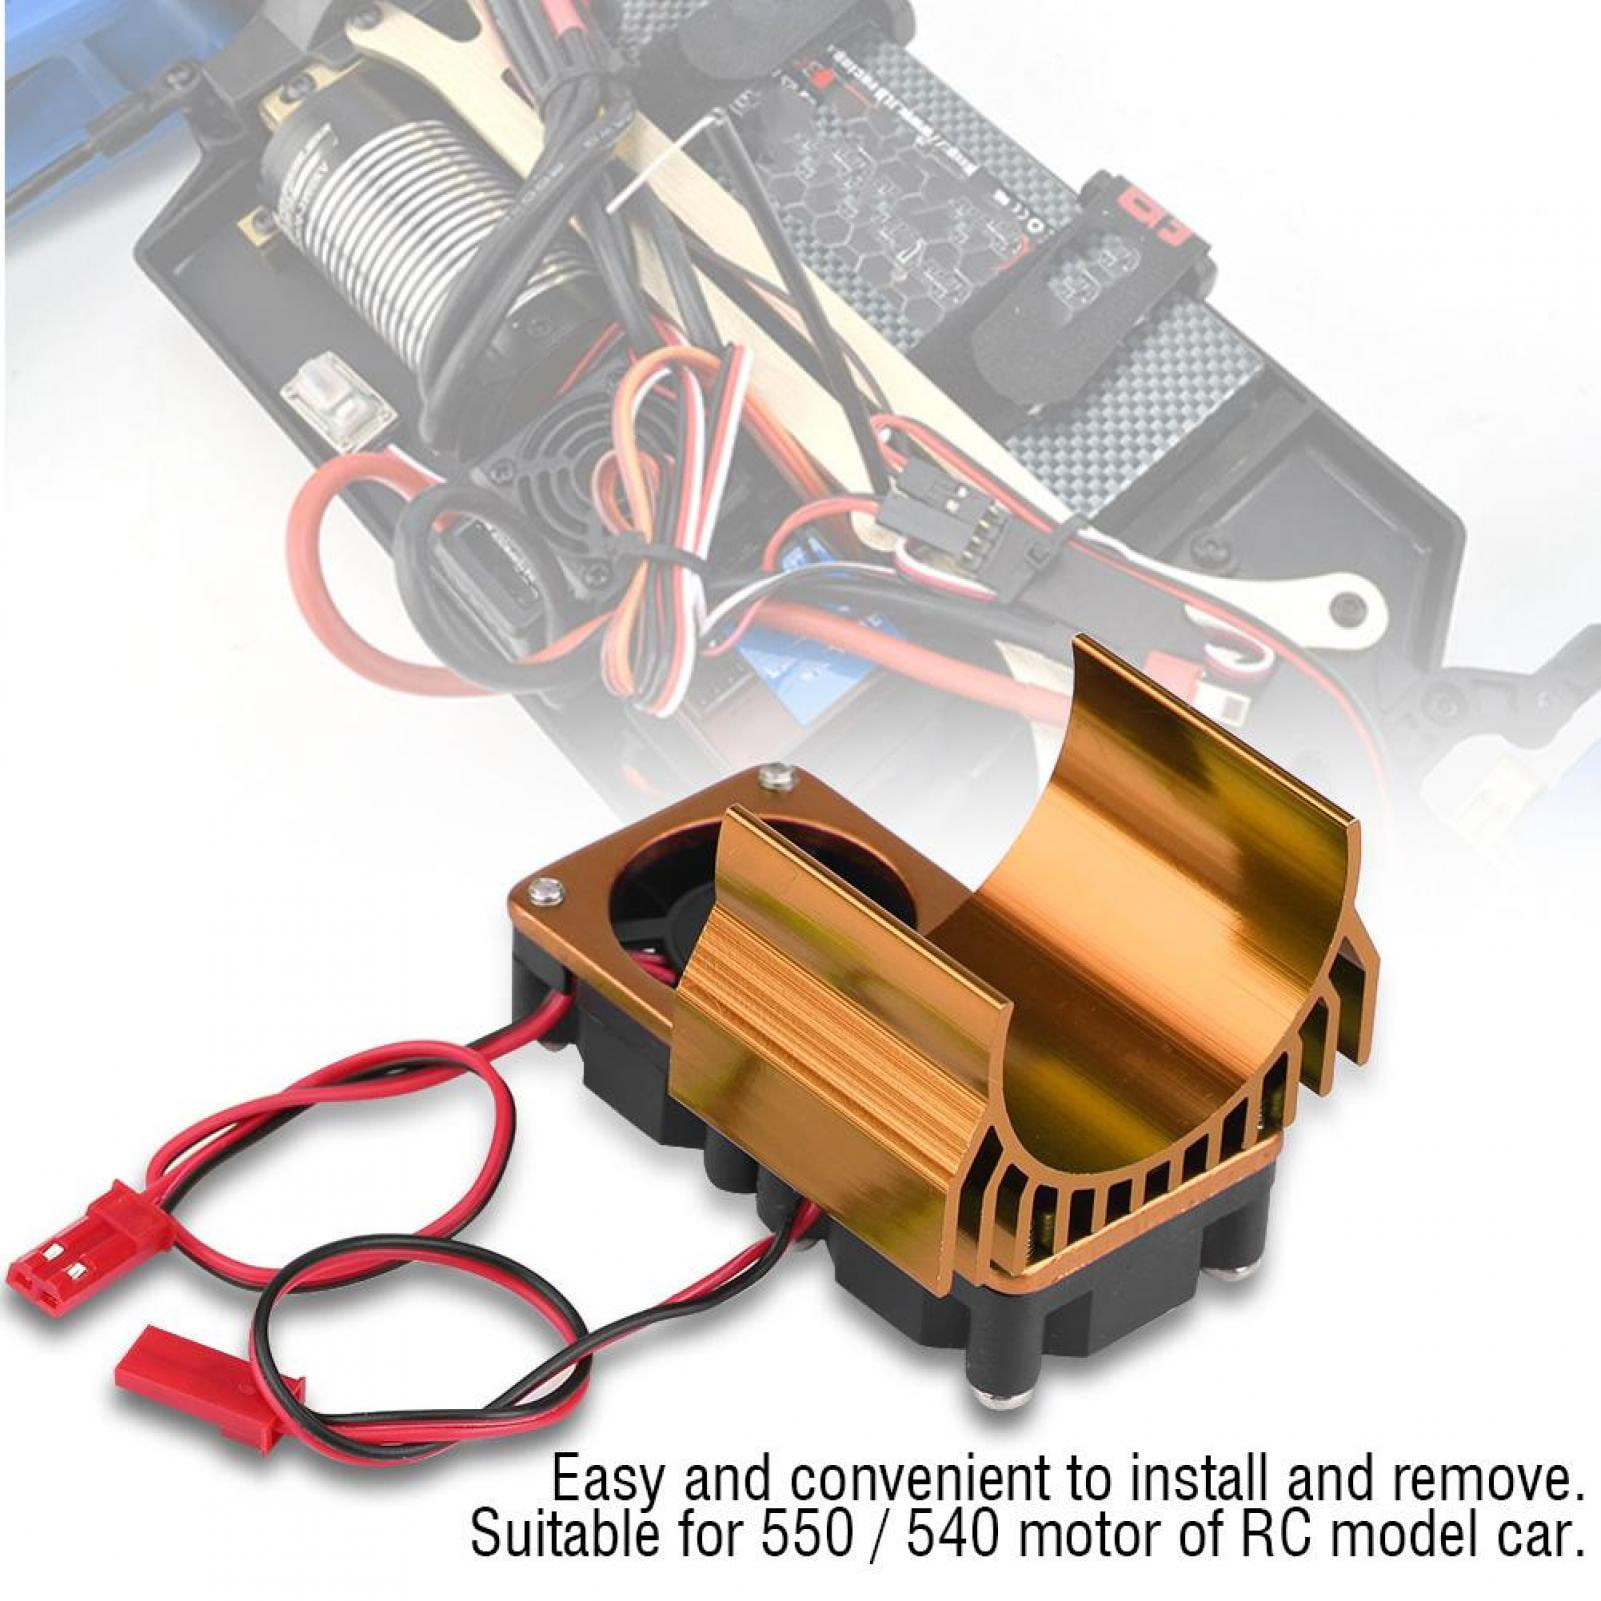 Tbest Motor Heat Sink RC Car 540/550 Motor Heat Sink with Cooling Fan Compatible with 1/10 Scale Electric RC Model Car 